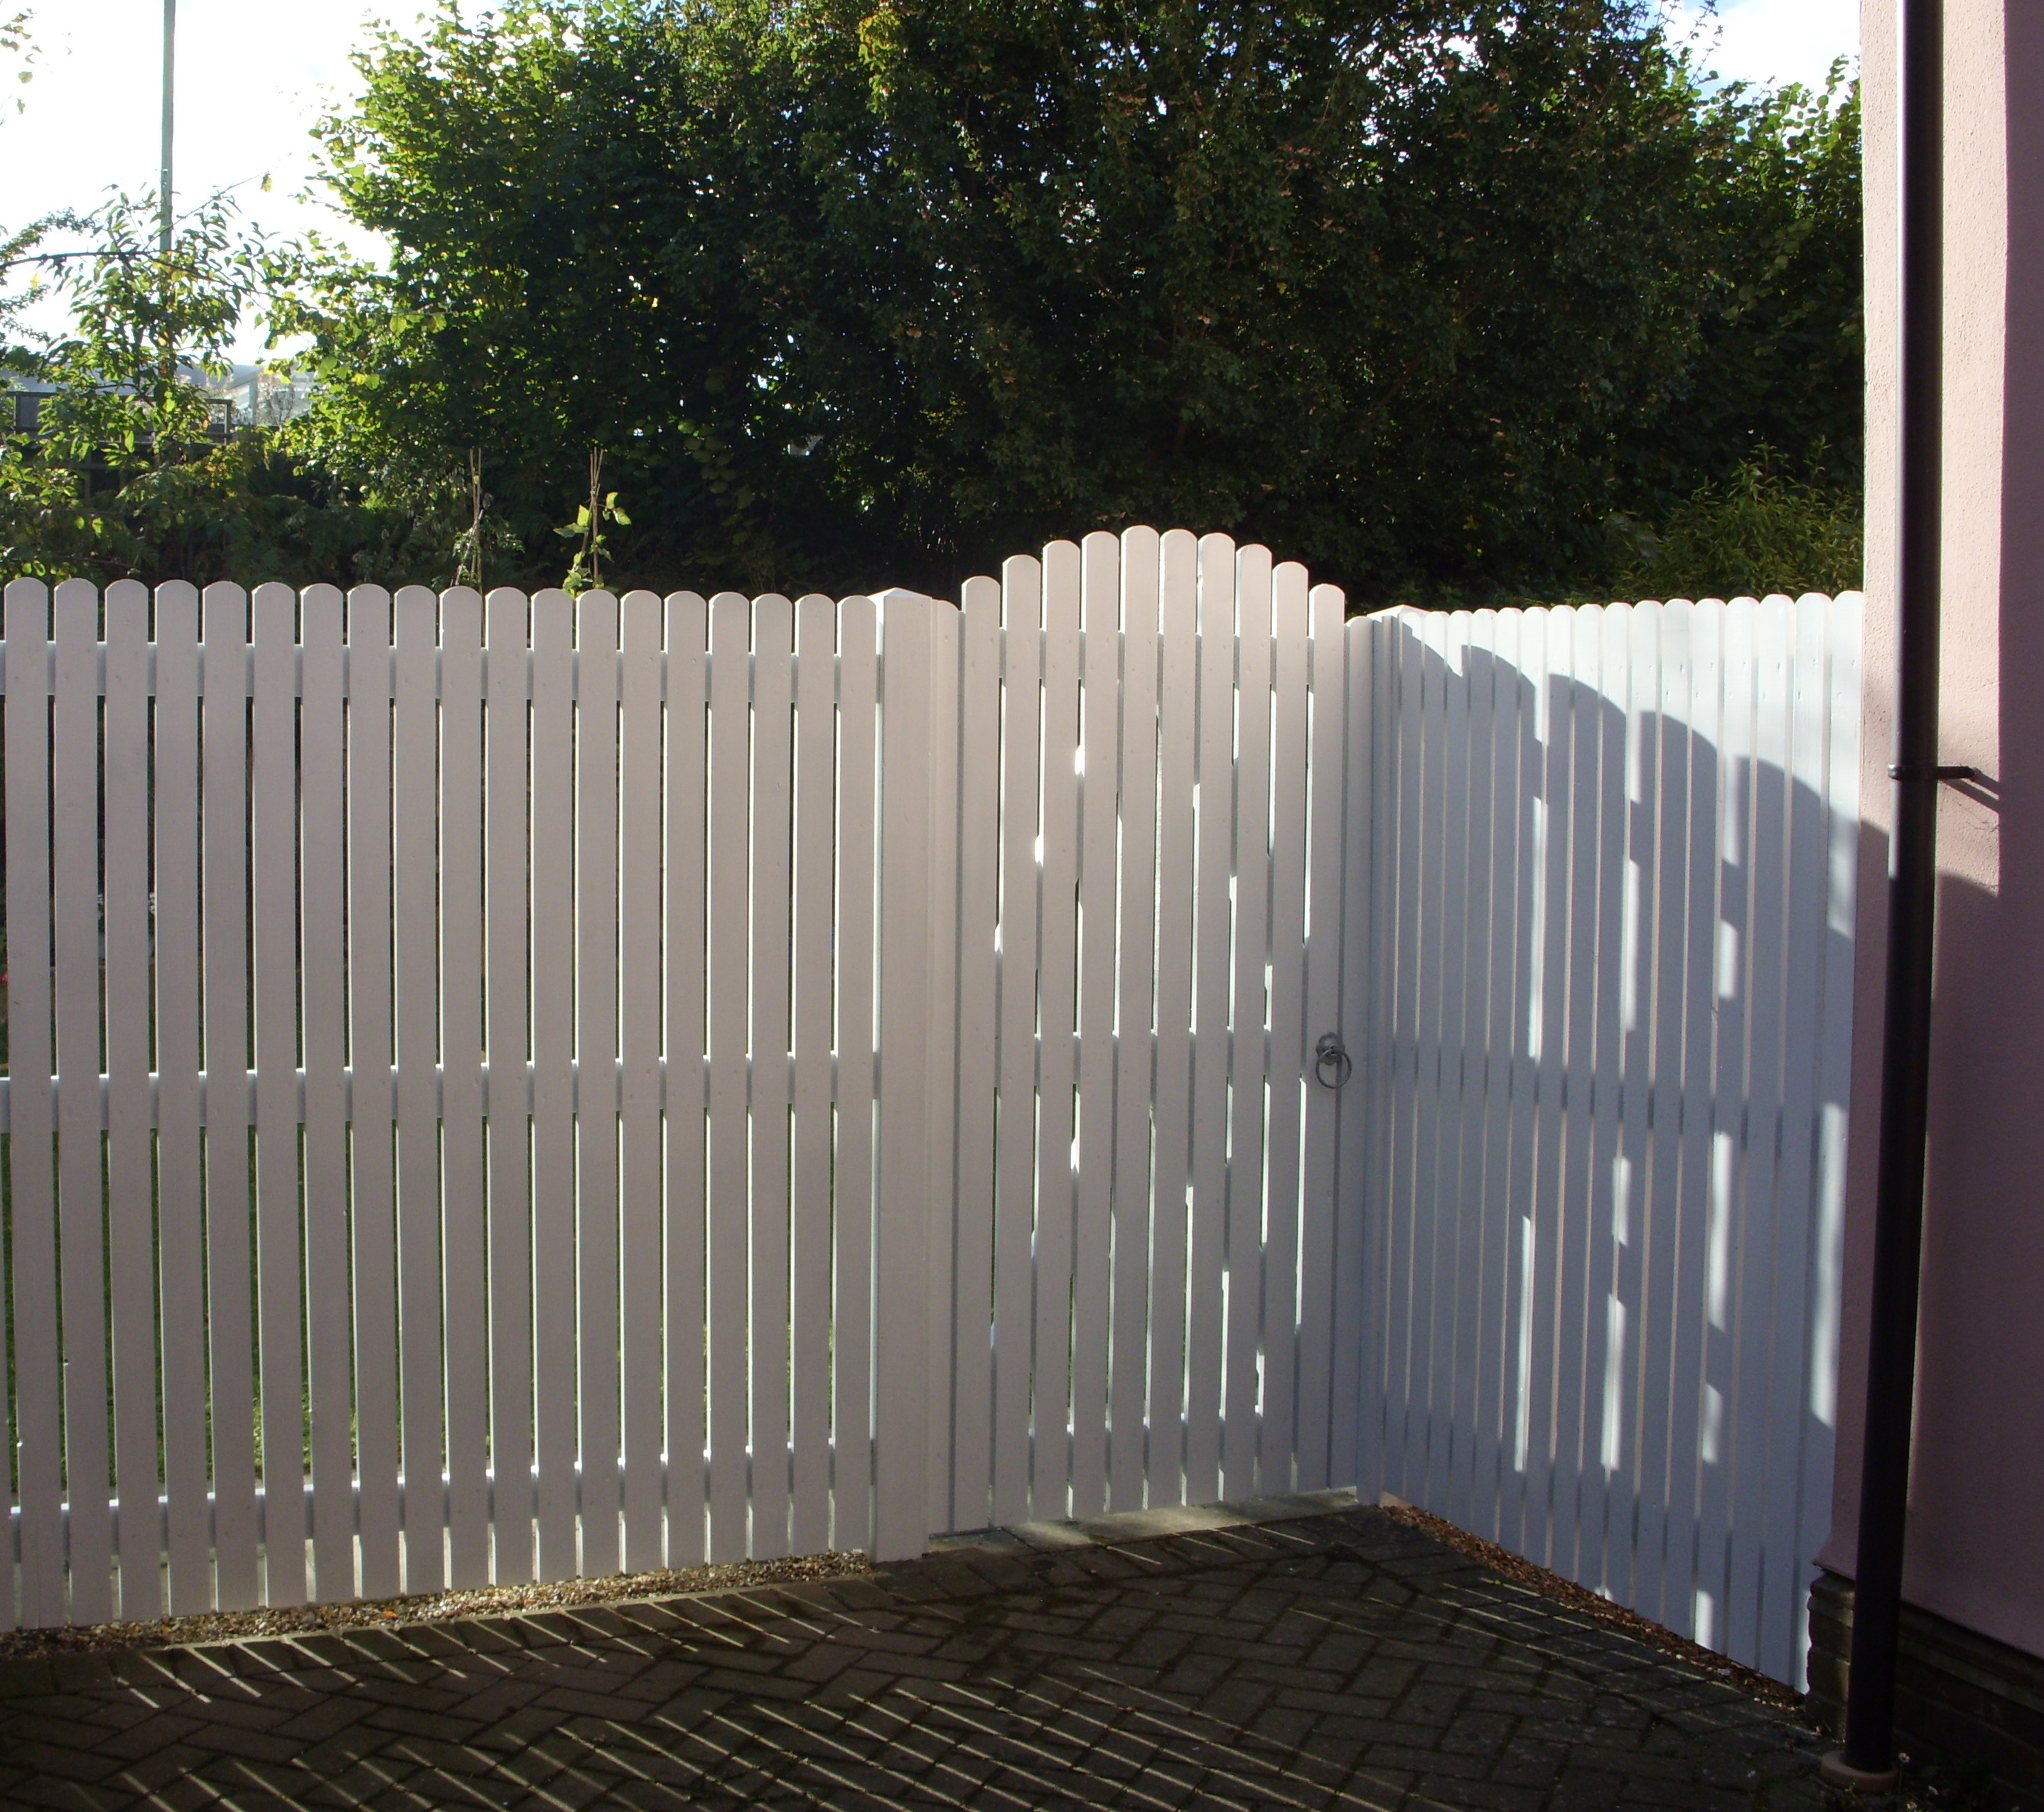 Palisade fencing and matching gate